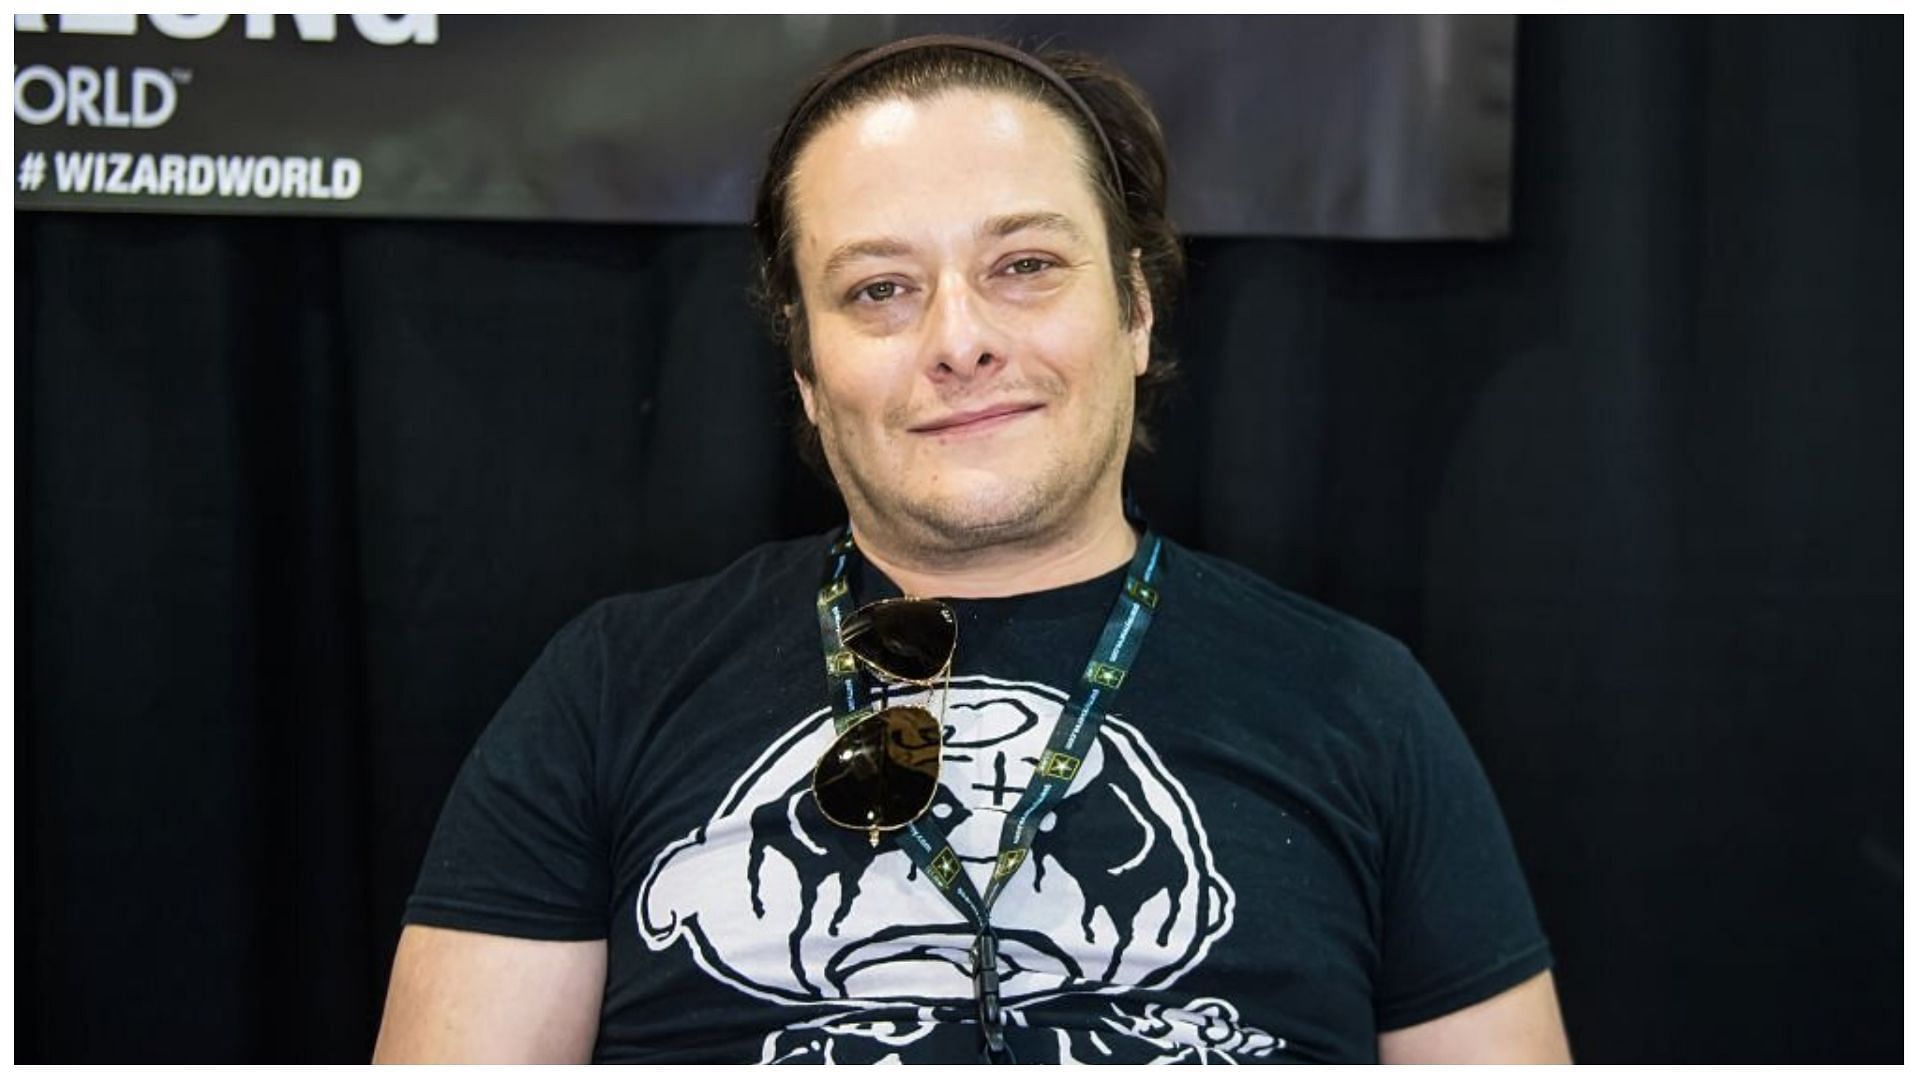 Edward Furlong accumulated a lot of wealth from his work in movies and TV series (Image via Gilbert Carrasquillo/Getty Images)